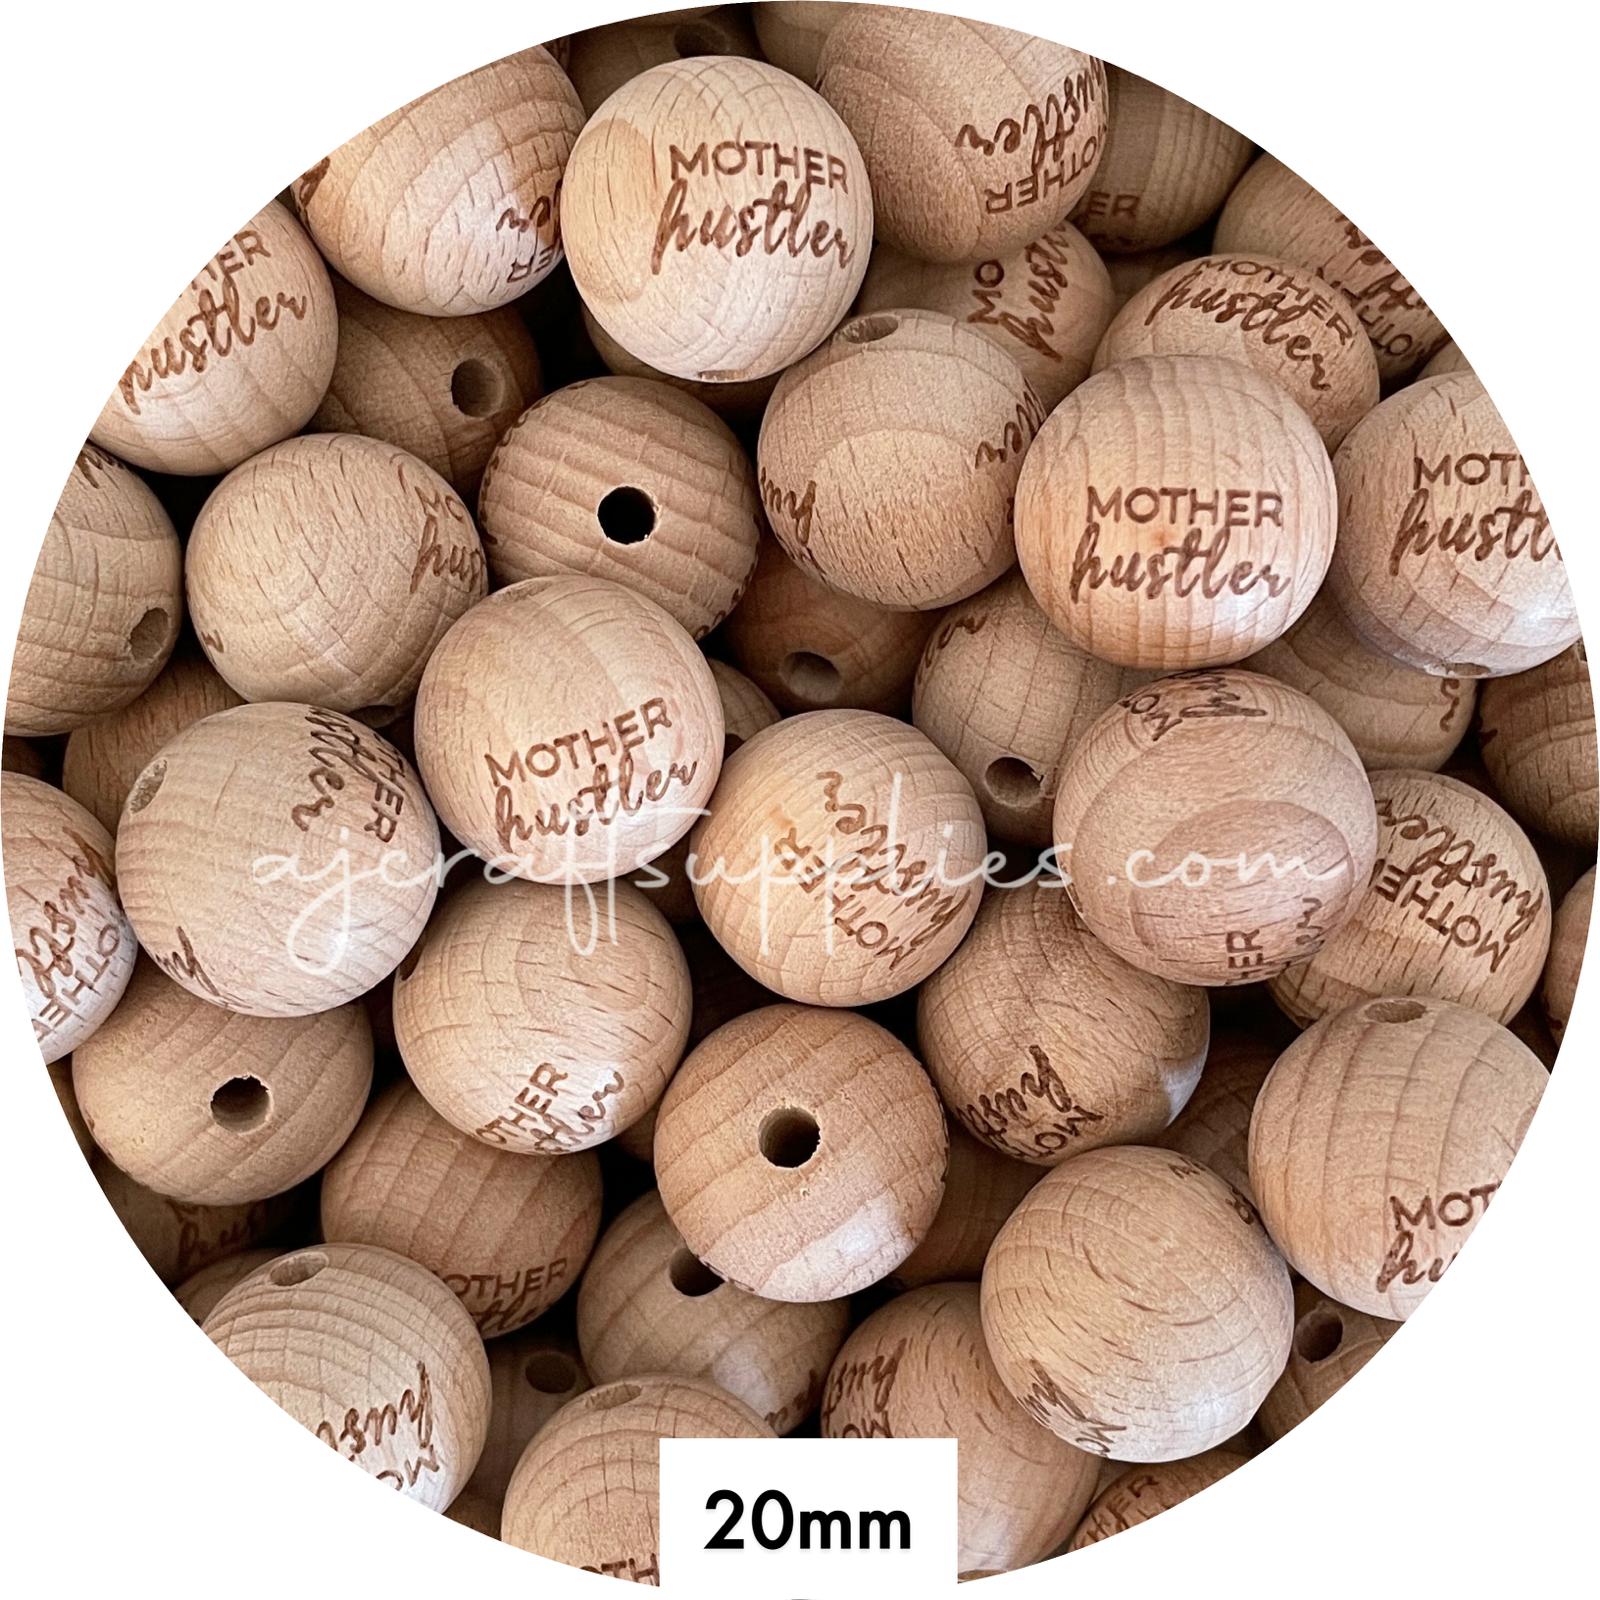 Beech Wood Engraved Beads (Mother Hustler) - 20mm Round - 5 beads *CLEARANCE*